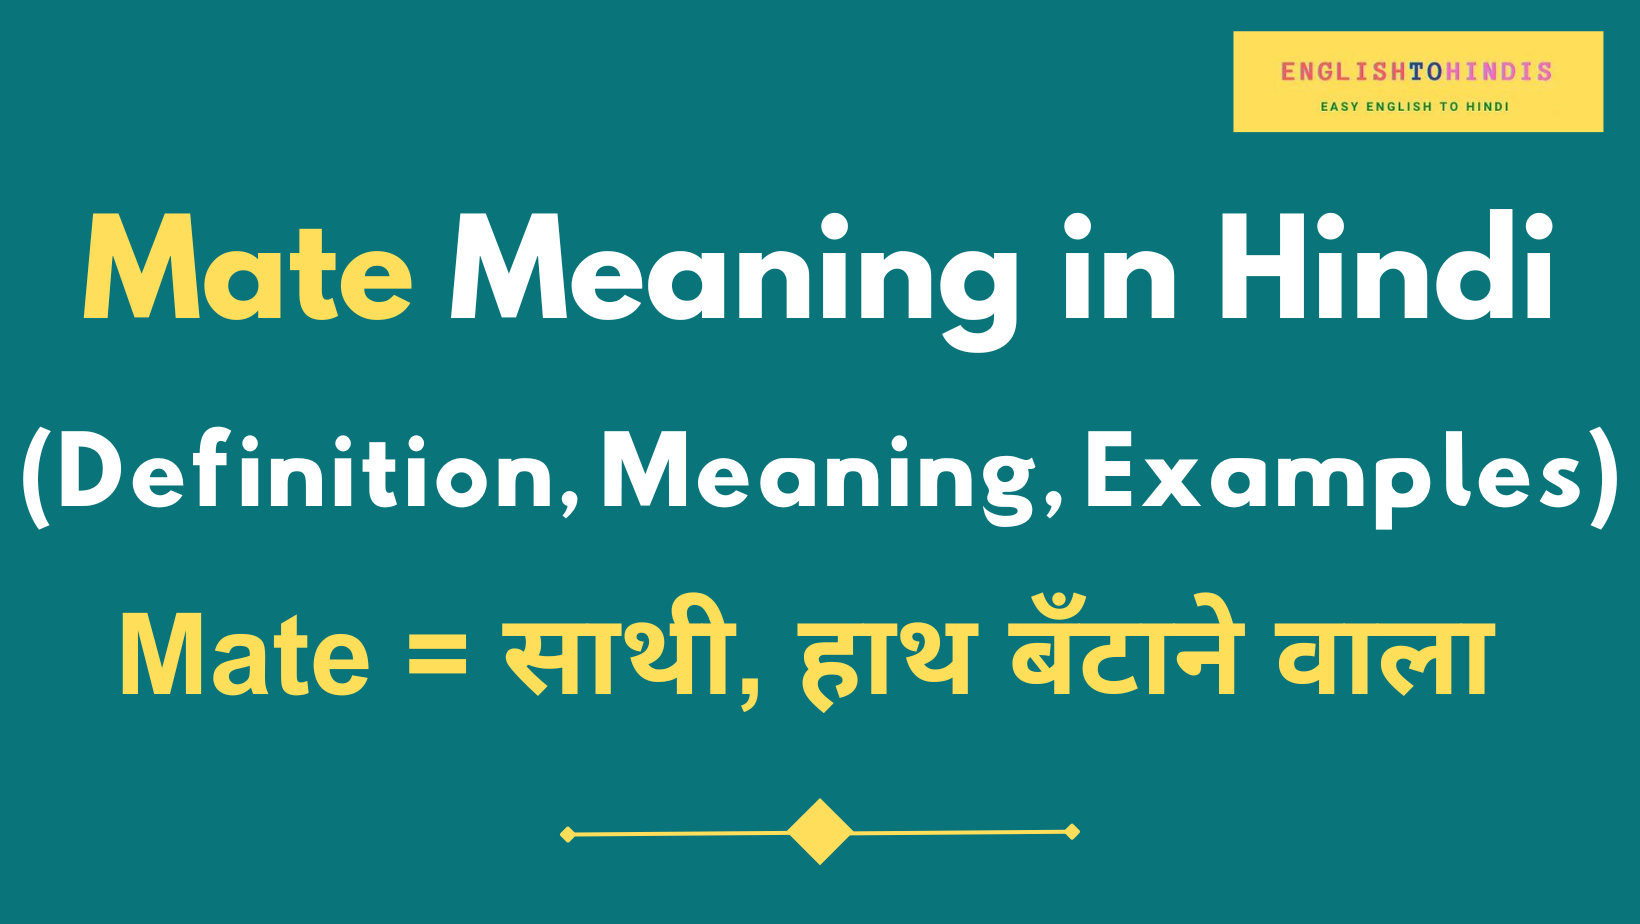 Mate Meaning in Hindi